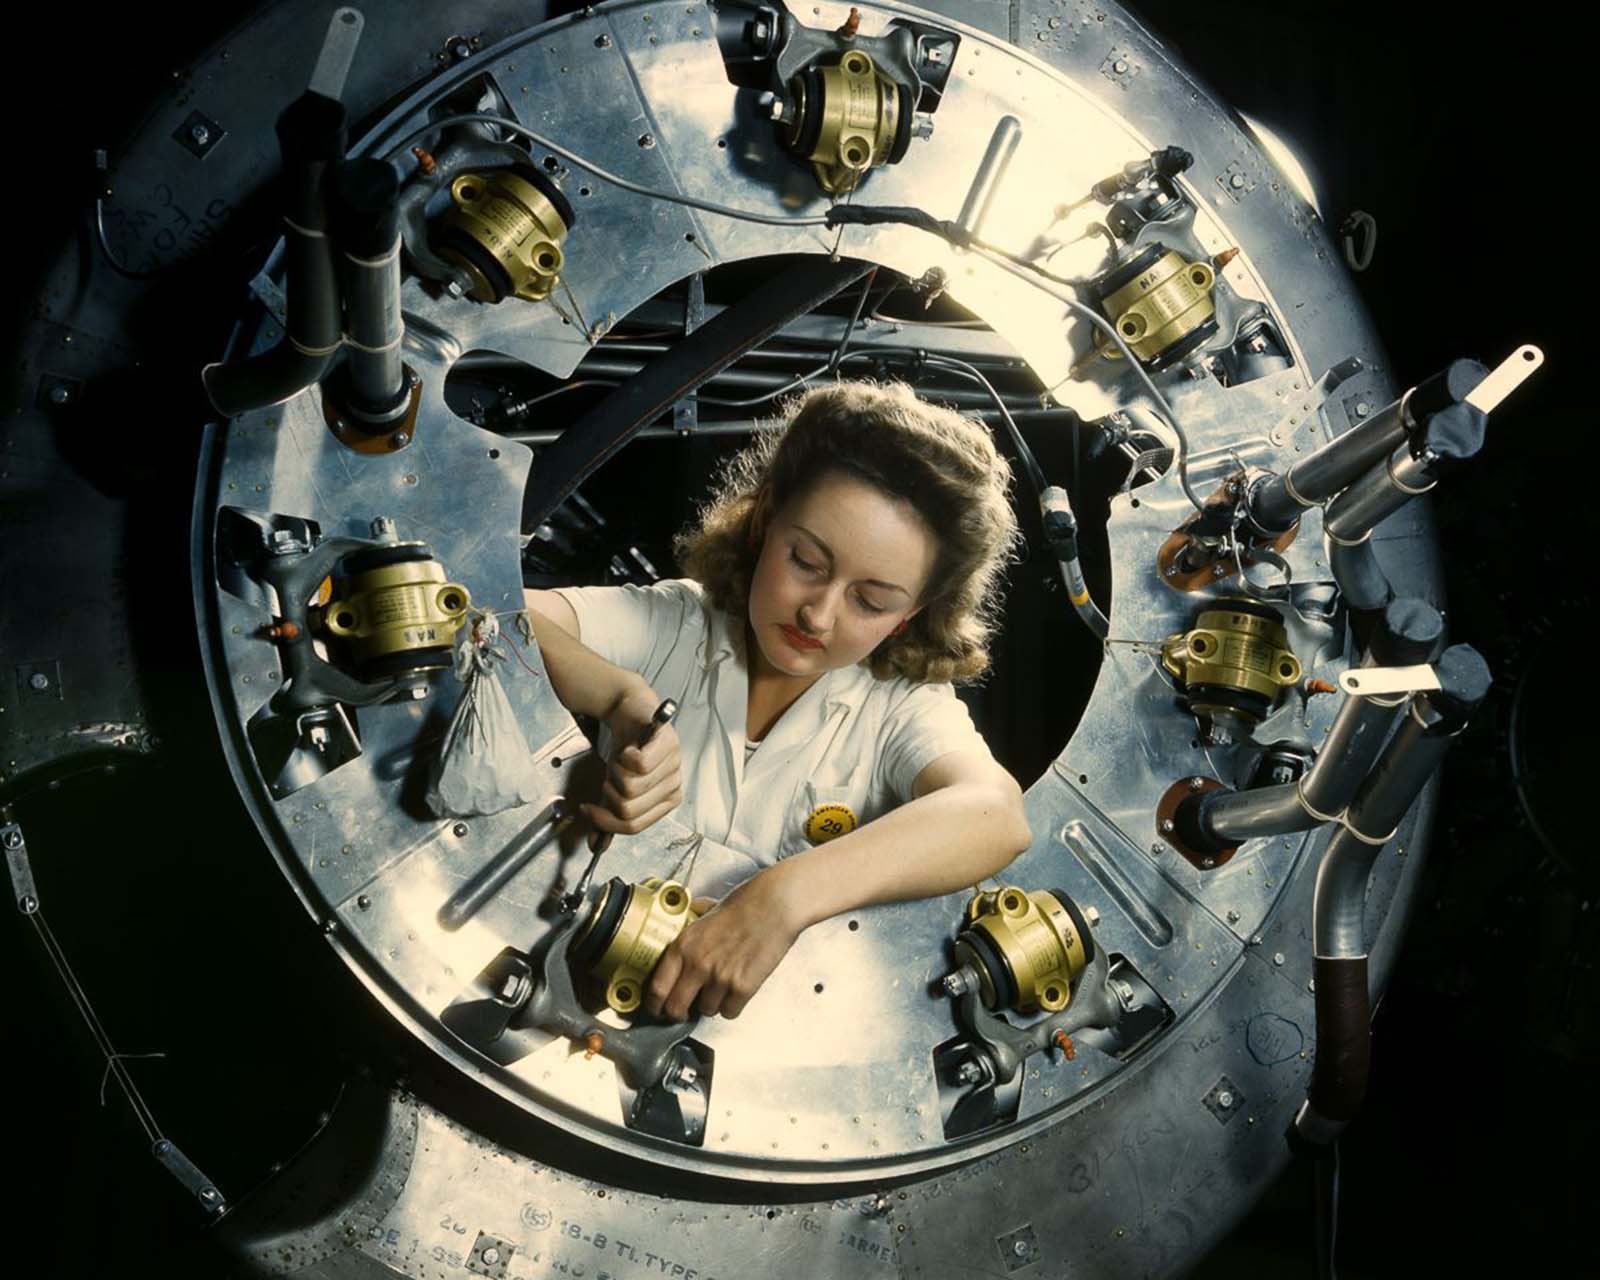 A worker assembles part of the cowling for a B-25 bomber motor at the North American Aviation plant in Inglewood, California, 1942.